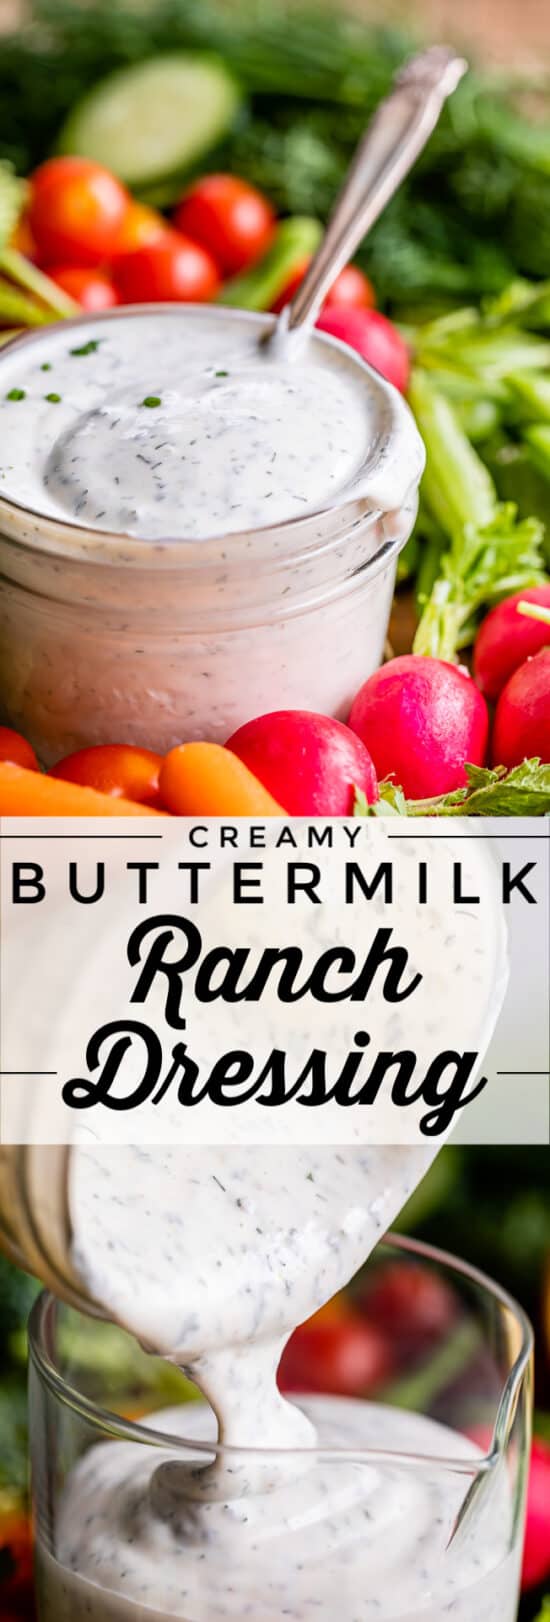 buttermilk ranch dressing surrounded by fresh veggies